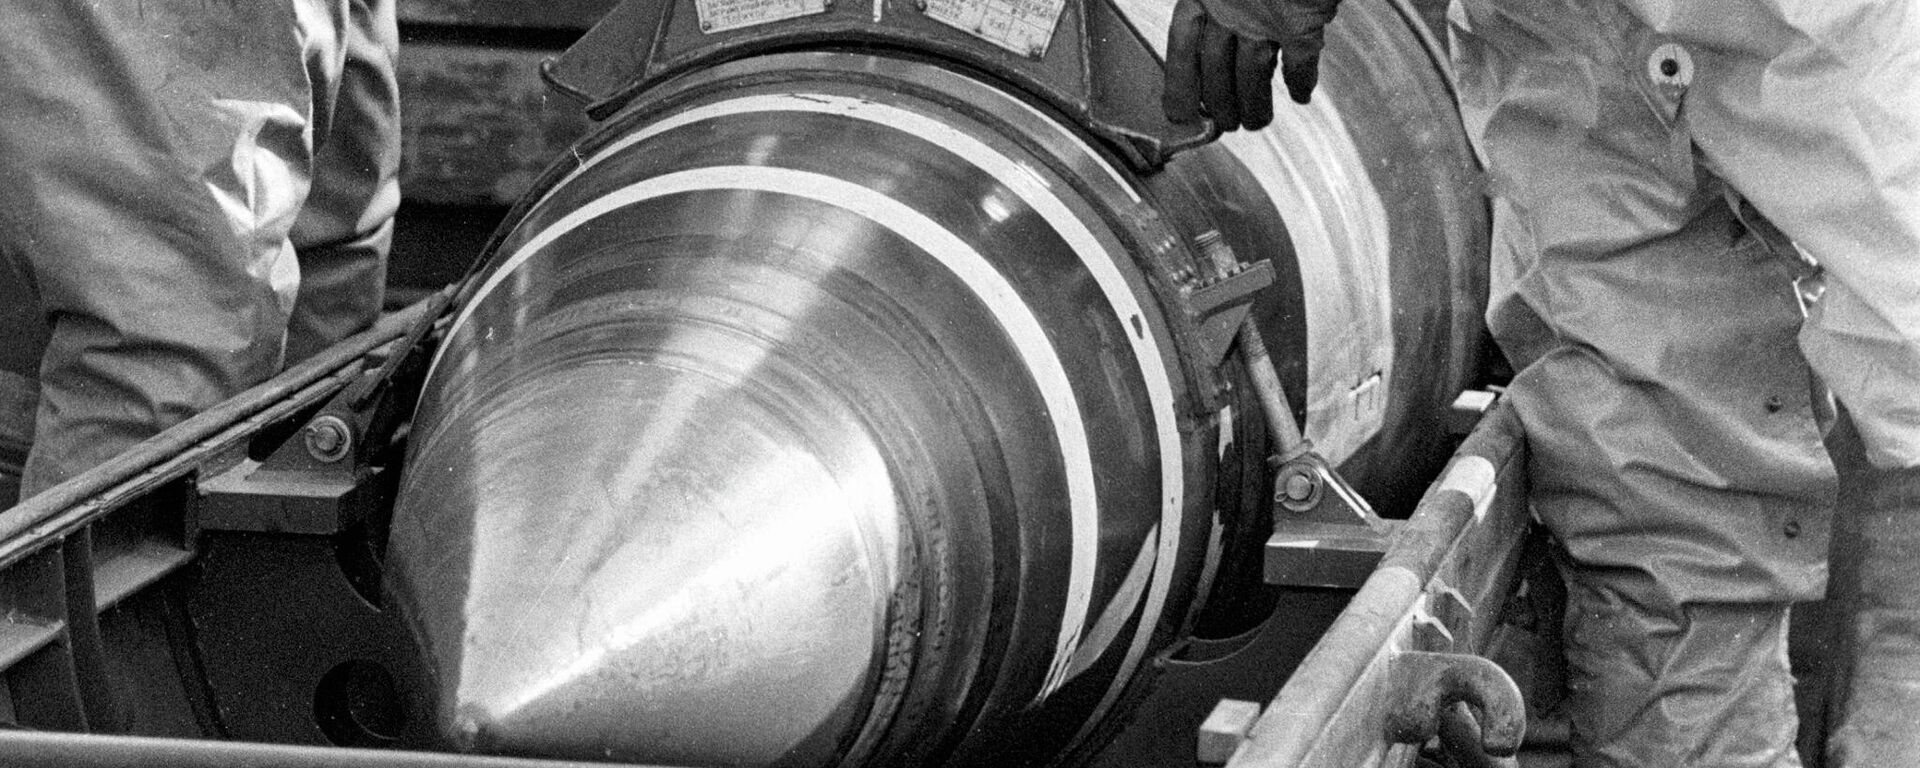 Ukrainian soldiers place nuclear warheads in containers for removal. 1992. - Sputnik International, 1920, 24.10.2022